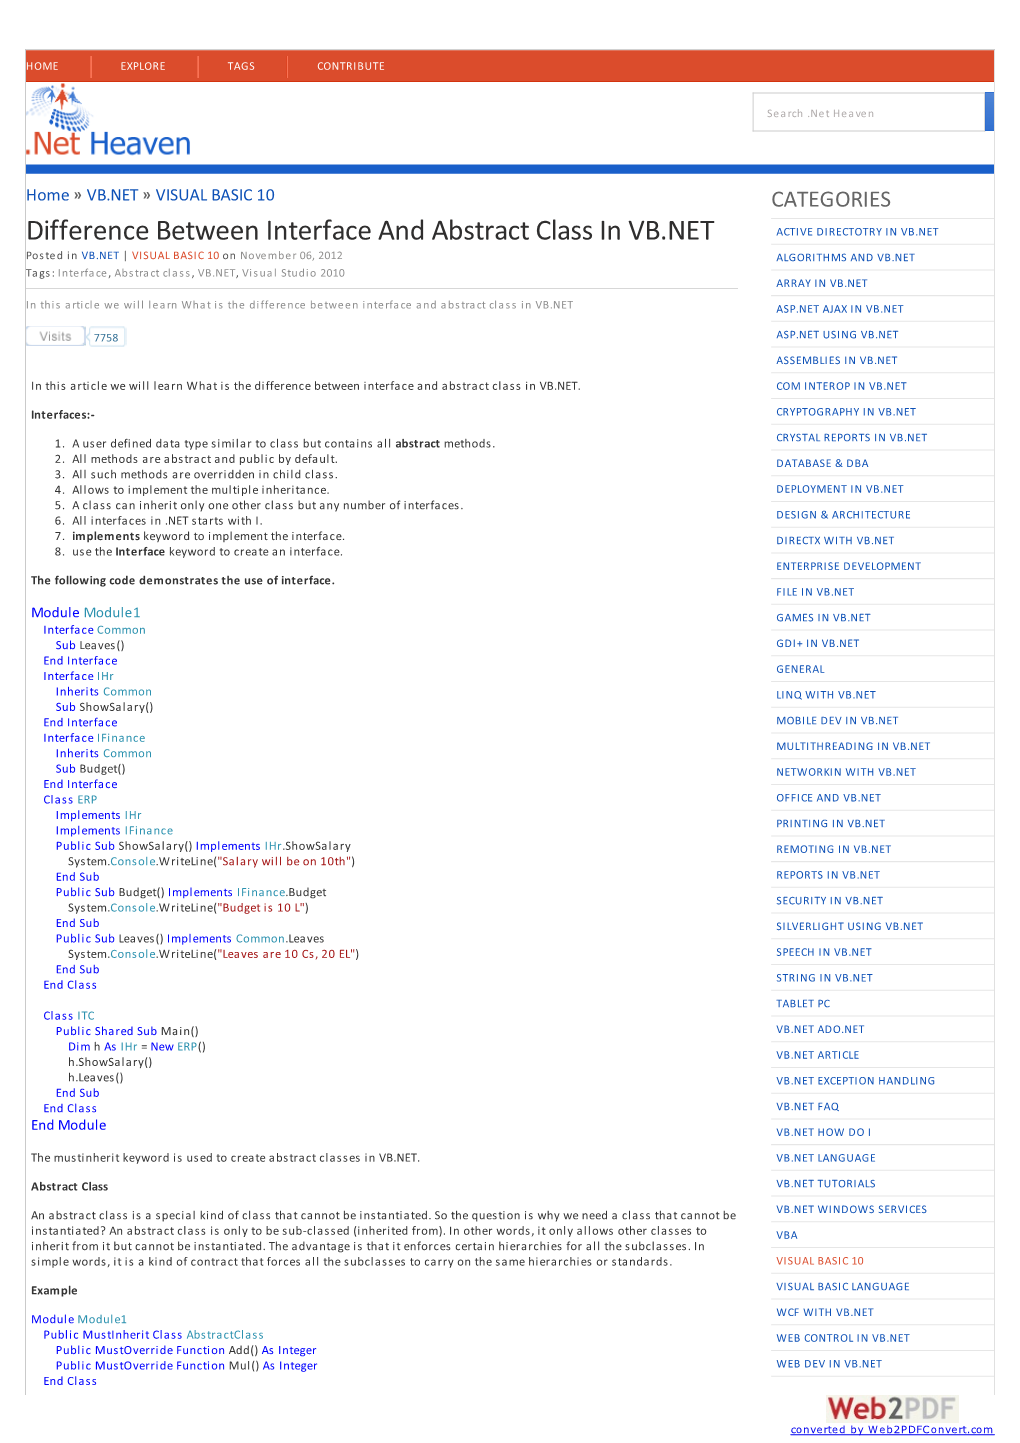 Difference Between Interface and Abstract Class in VB.NET